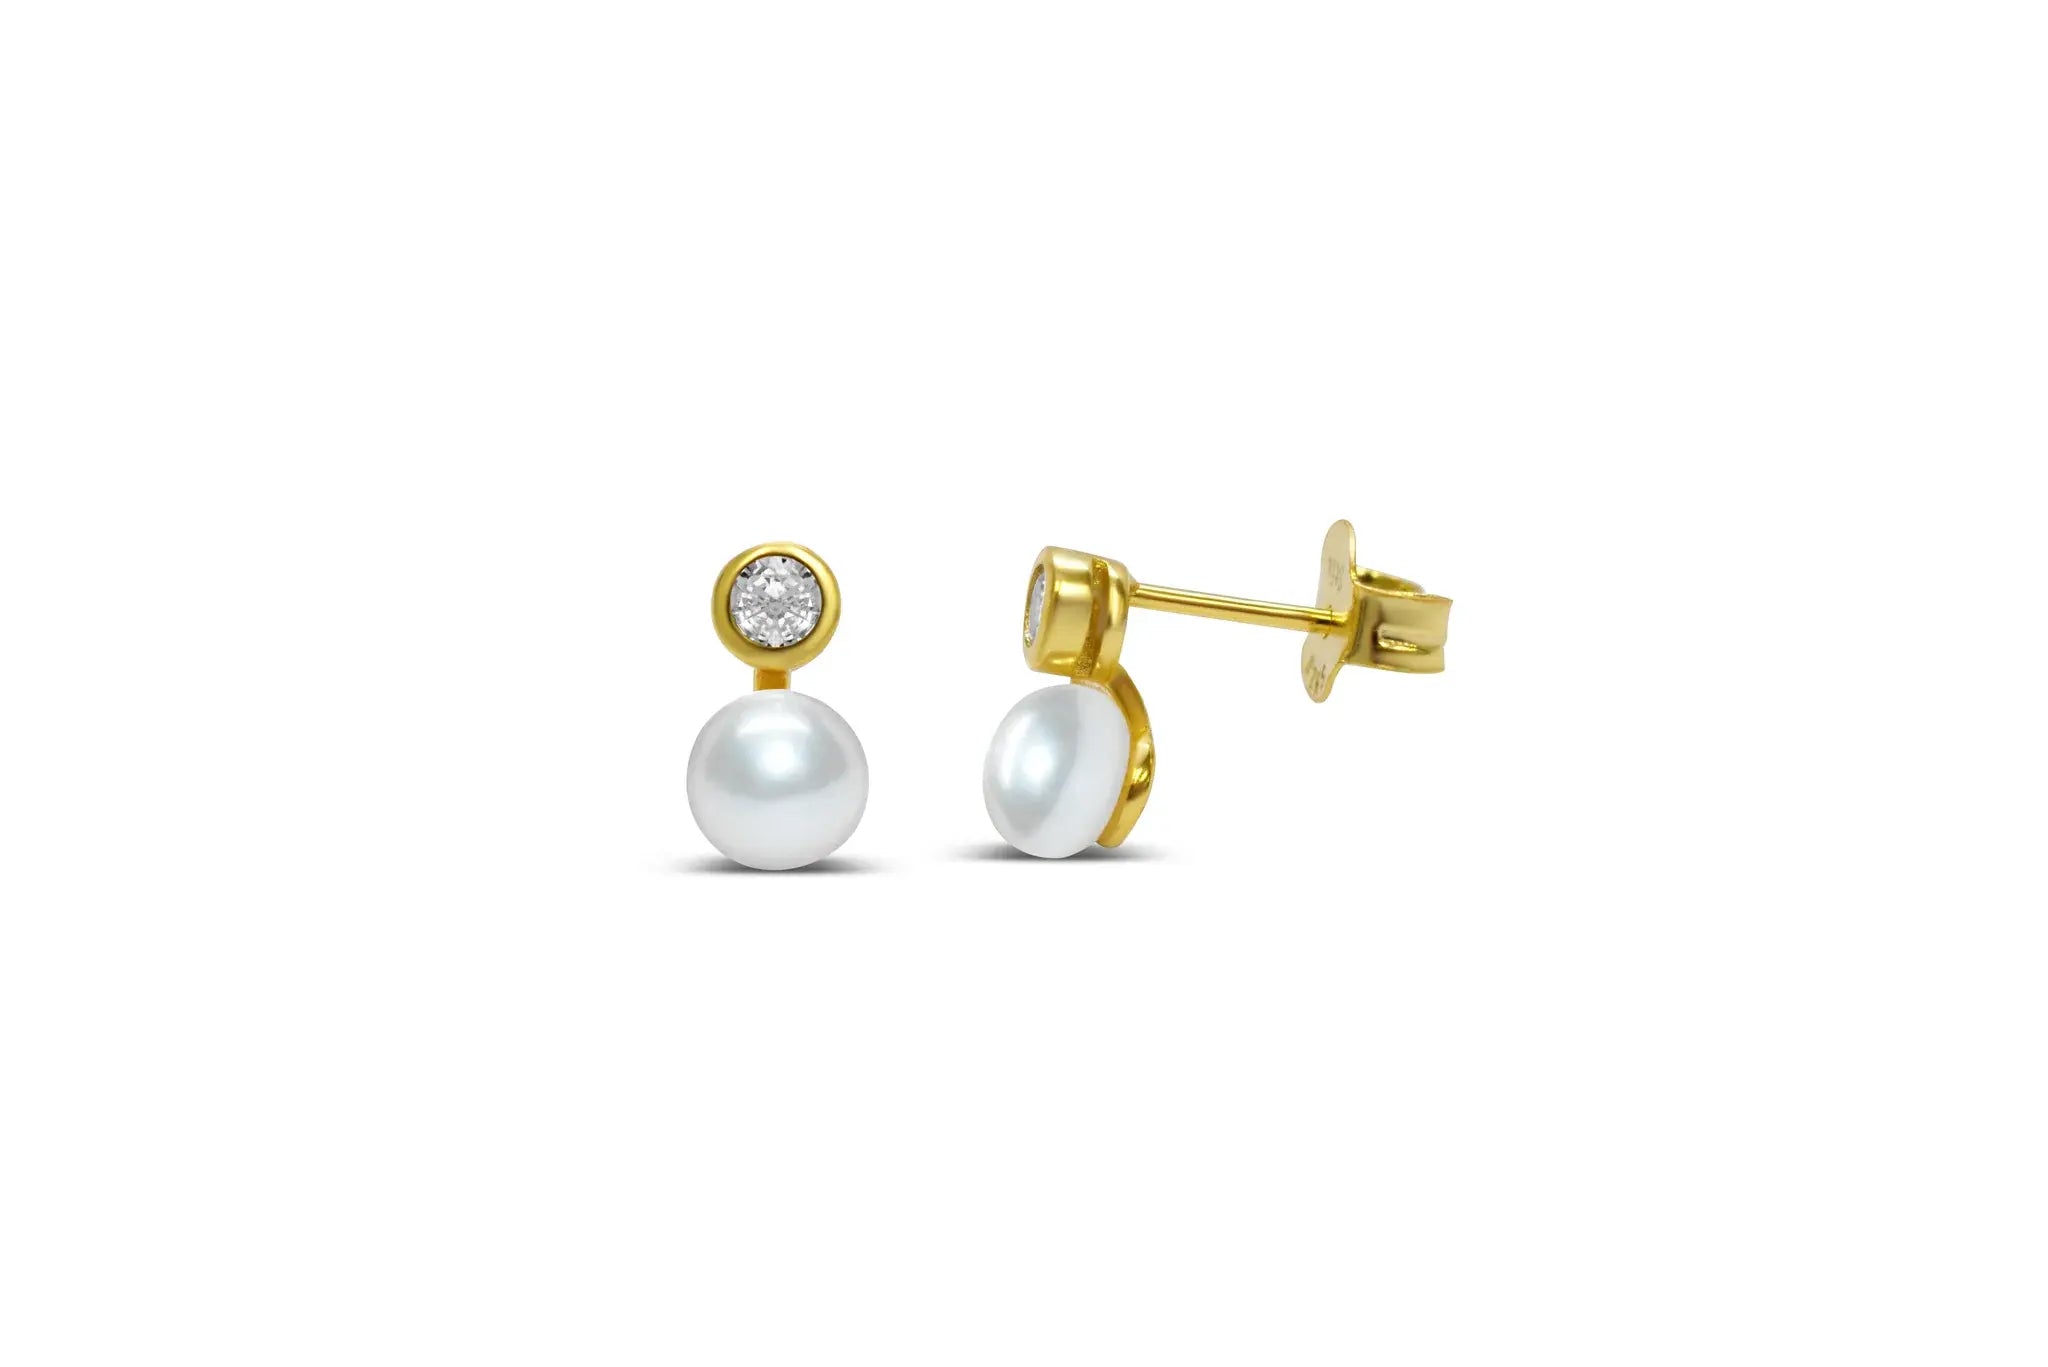 Gold pearl earrings with stud. 